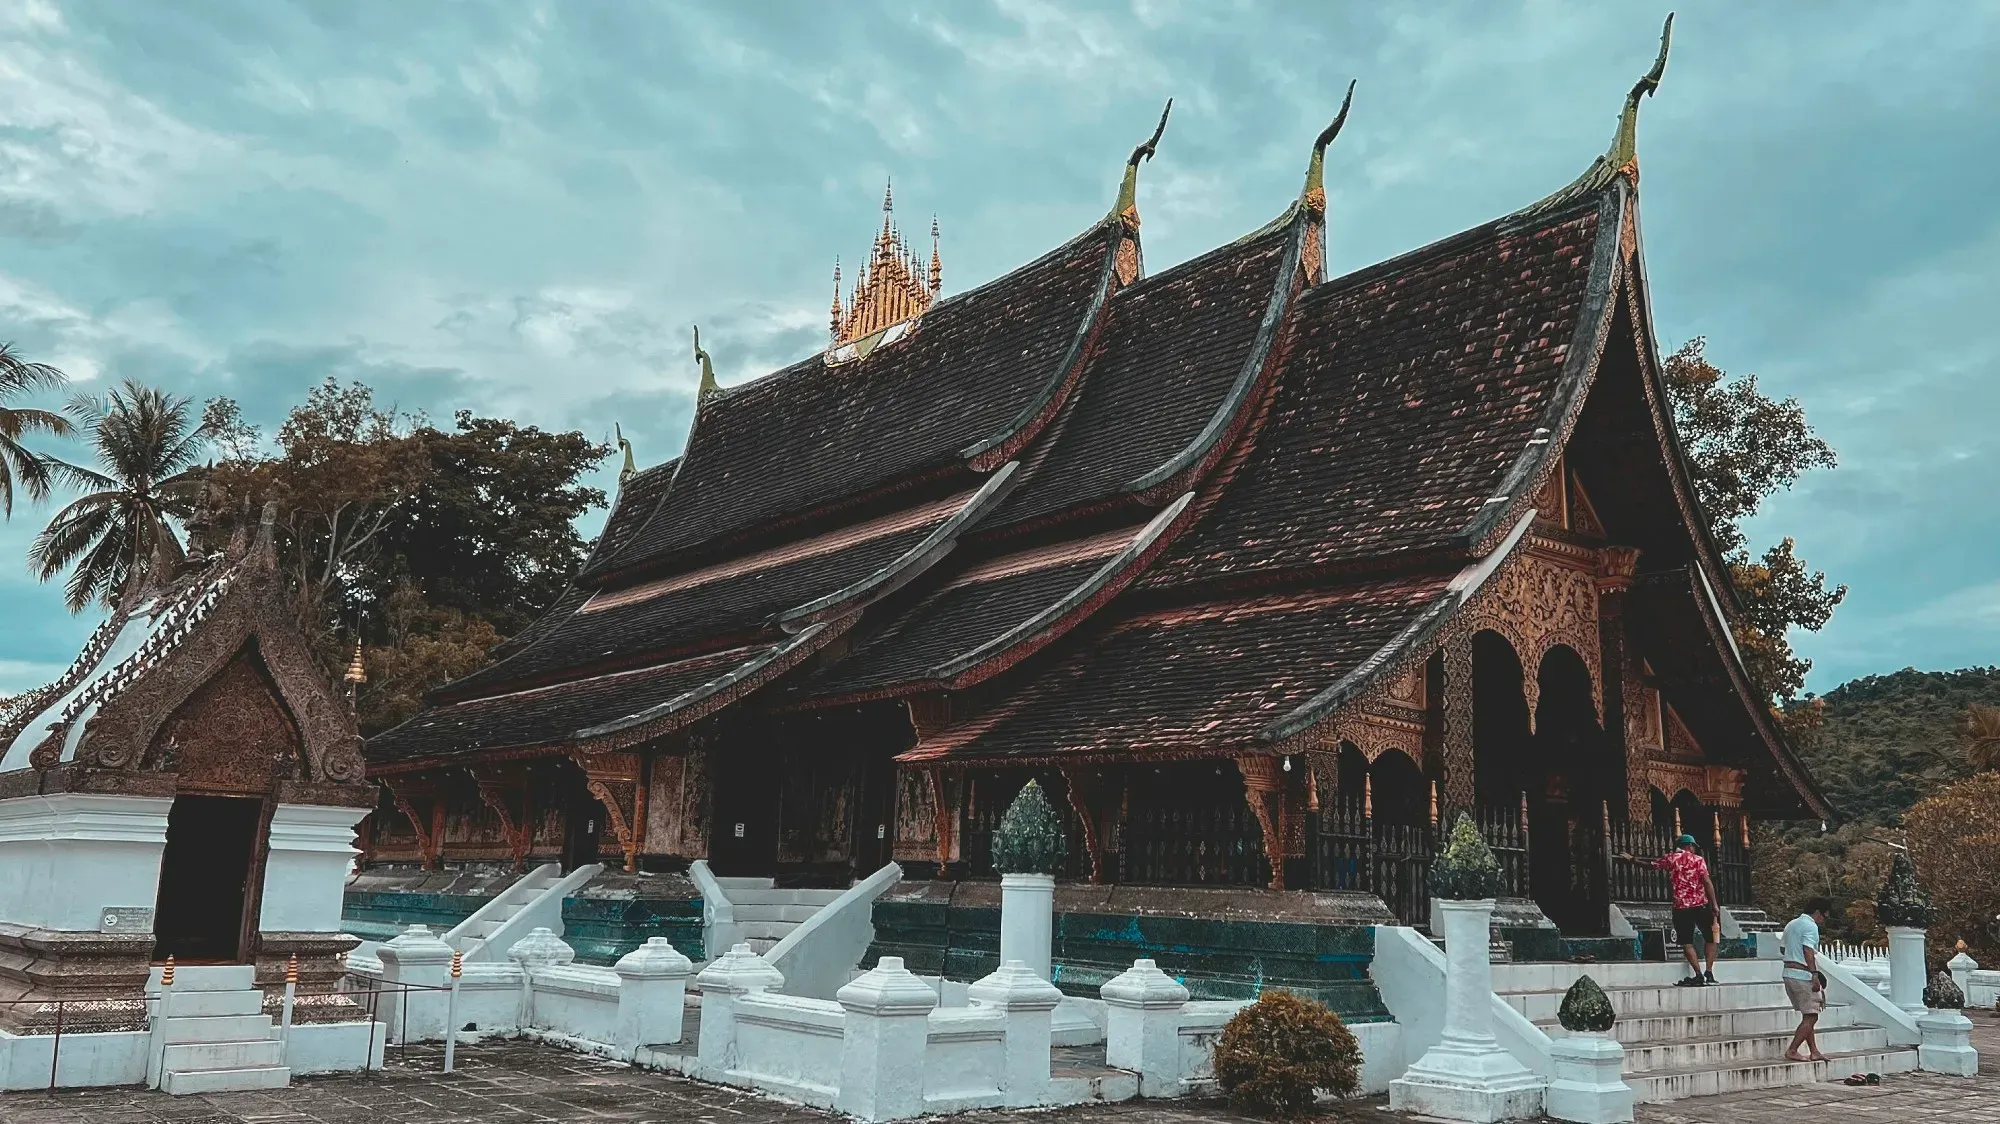 Wat Xieng Thong, shot from exterior side and front of temple.